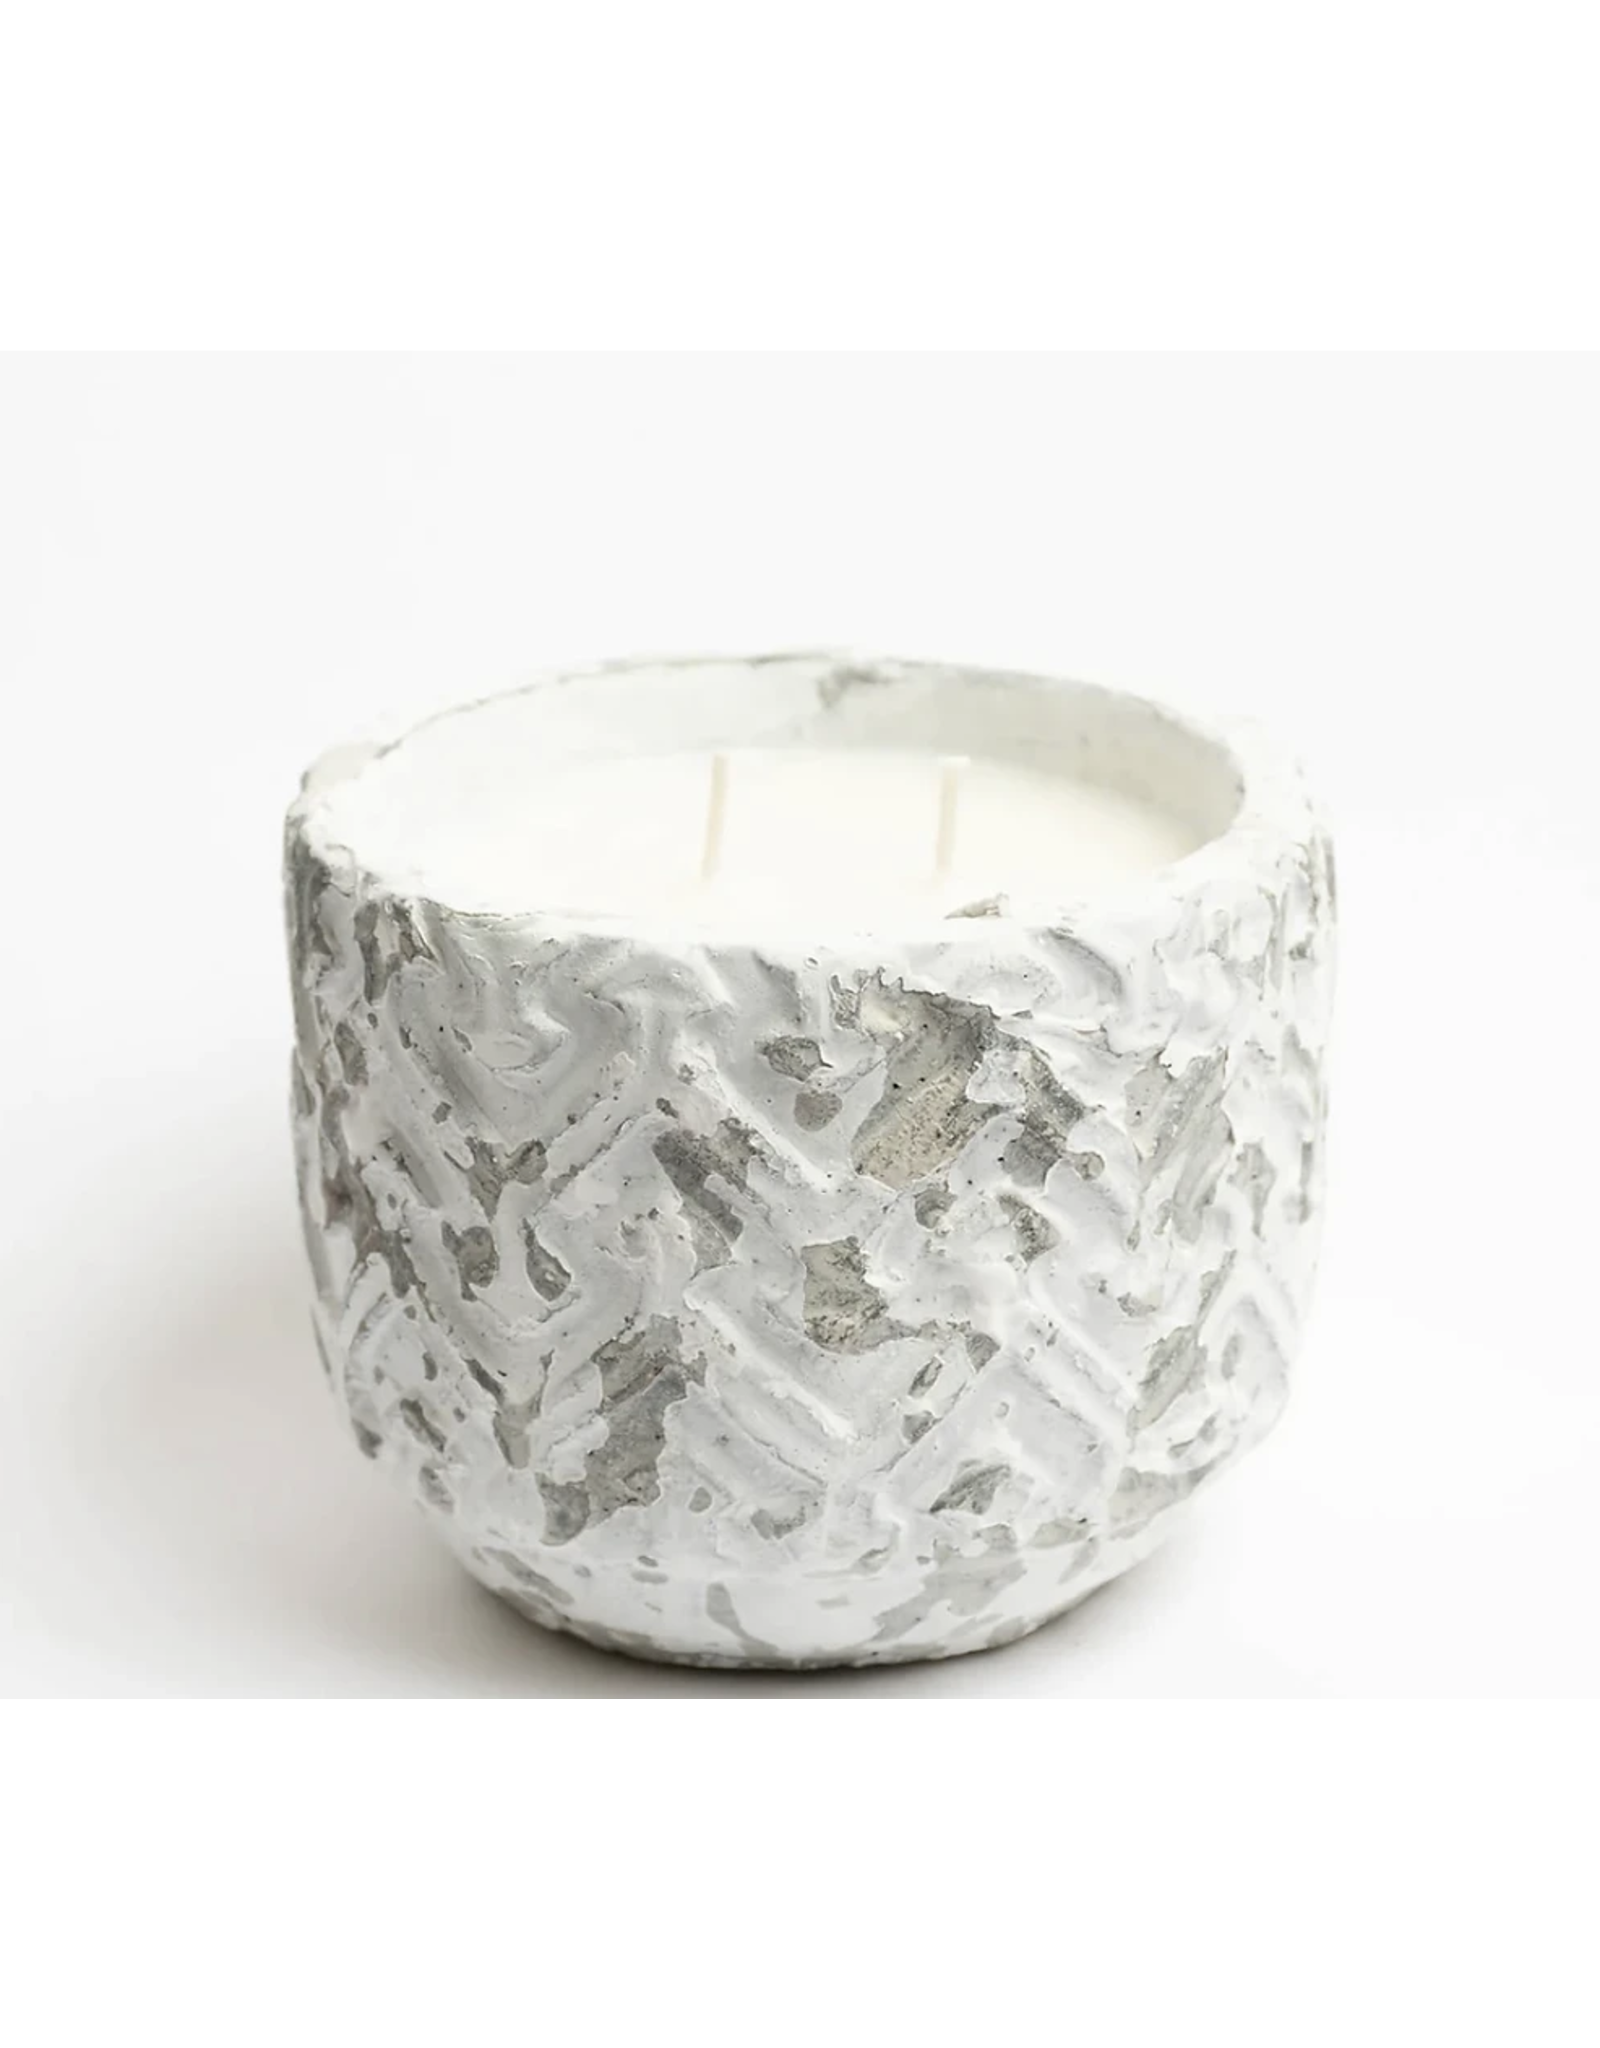 Southern Lights Candle Creme Brulee Rustic Concrete Candle